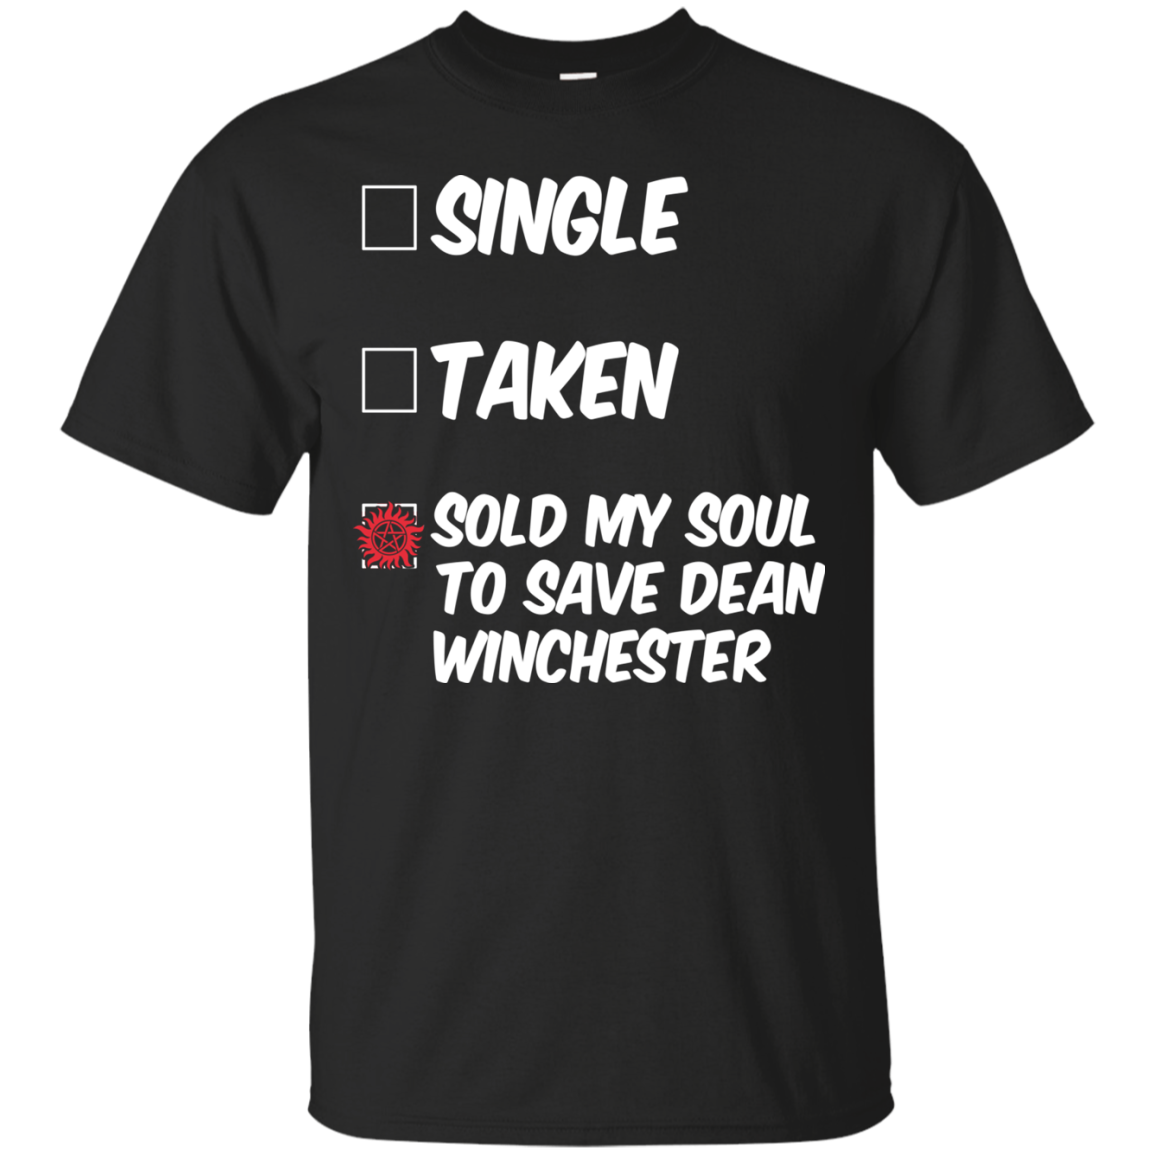 Dean Winchester Supernatural Shirts Sold My Soul - Teesmiley